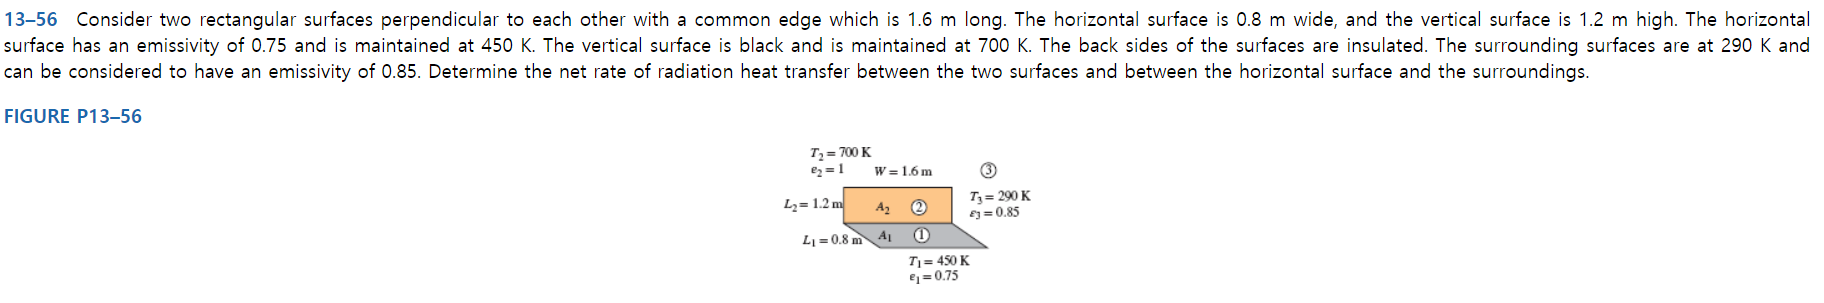 13-56 Consider two rectangular surfaces perpendicular to each other with a common edge which is 1.6 m long. The horizontal surface is 0.8 m wide, and the vertical surface is 1.2 m high. The horizontal
surface has an emissivity of 0.75 and is maintained at 450 K. The vertical surface is black and is maintained at 700 K. The back sides of the surfaces are insulated. The surrounding surfaces are at 290 K and
can be considered to have an emissivity of 0.85. Determine the net rate of radiation heat transfer between the two surfaces and between the horizontal surface and the surroundings.
FIGURE P13–56
Tz= 700 K
e2 = 1
W = 1.6 m
T3 = 290 K
E3= 0.85
Lz= 1.2 m
A2
L1 = 0.8 m
A1
Tj = 450 K
€1 = 0.75
